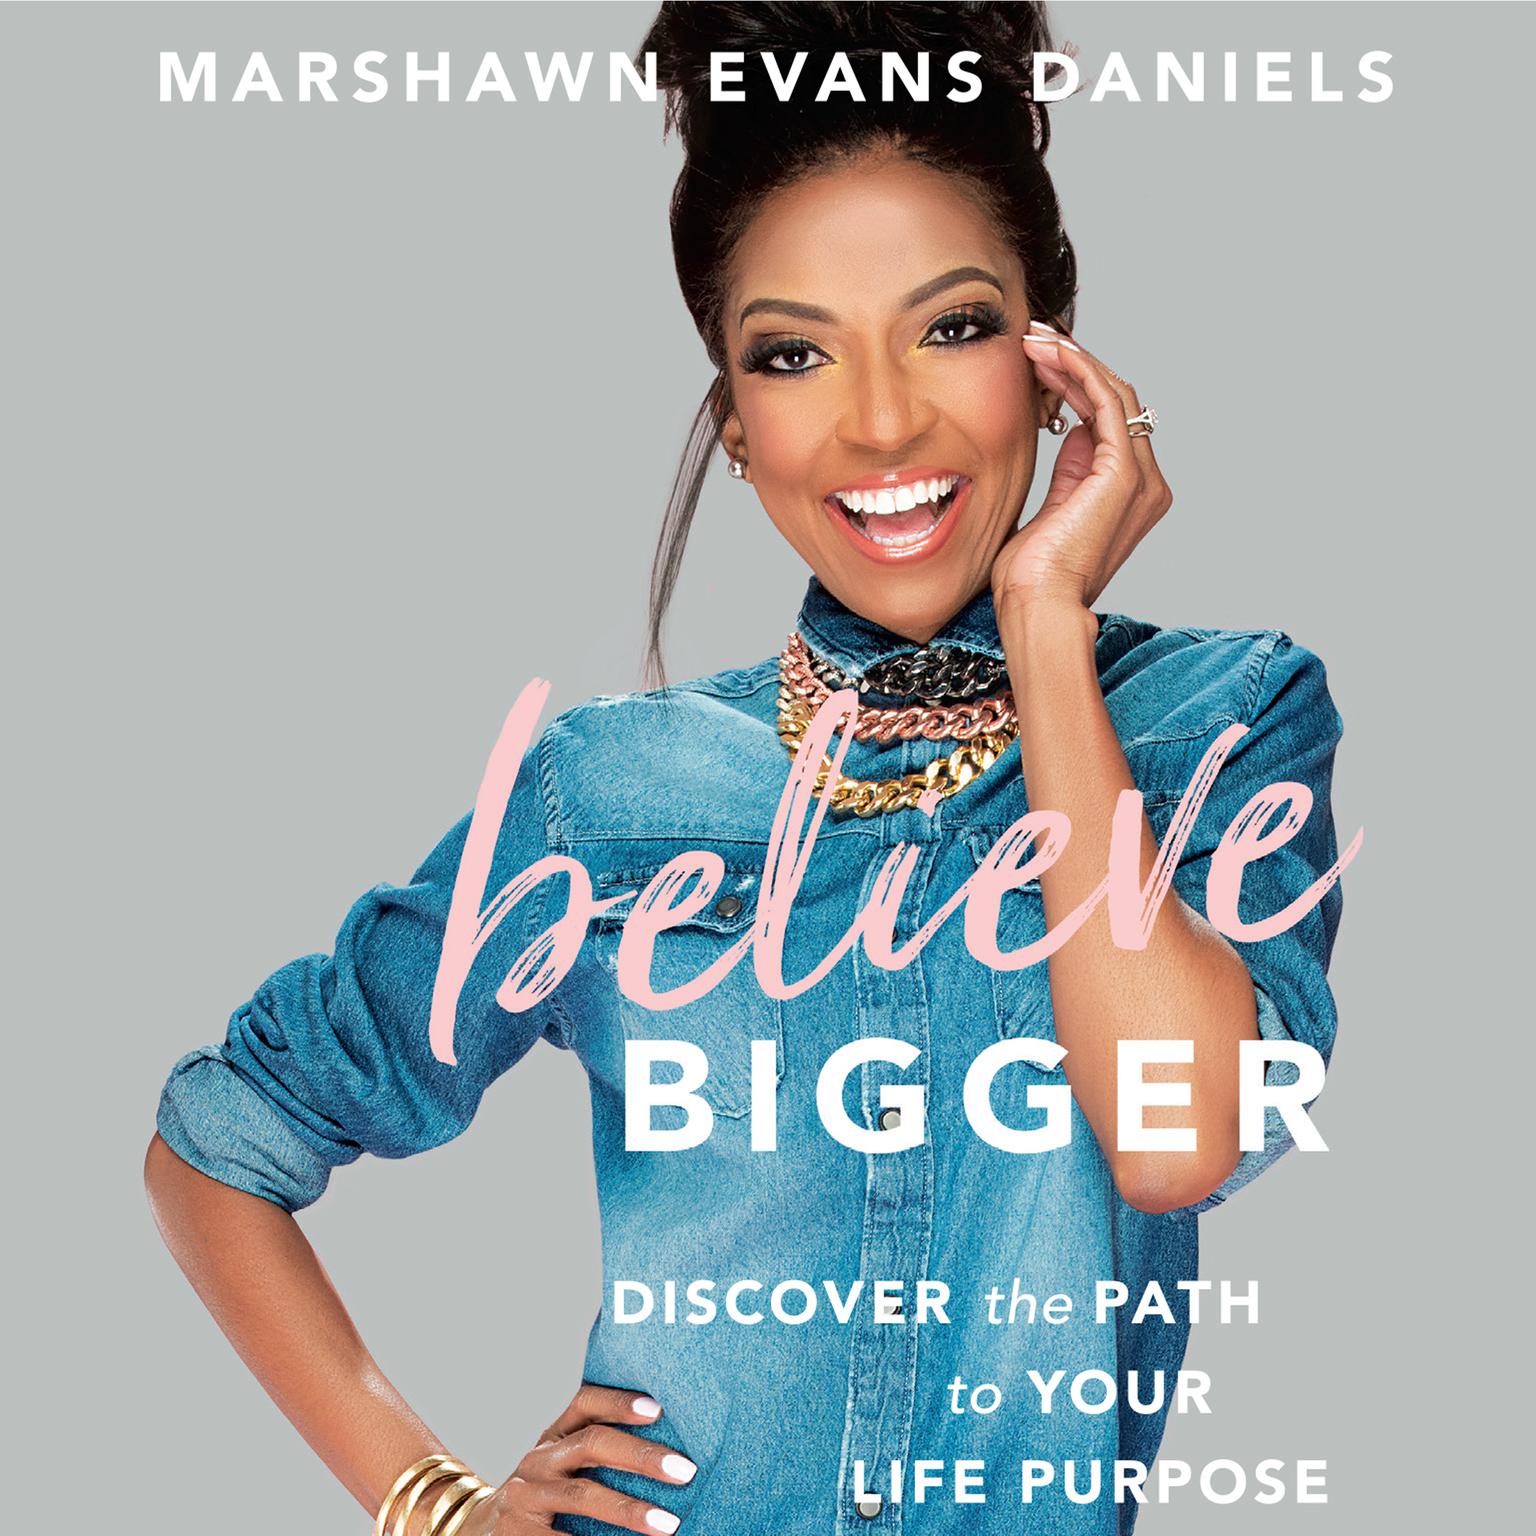 Believe Bigger: Discover the Path to Your Life Purpose Audiobook, by Marshawn Evans Daniels